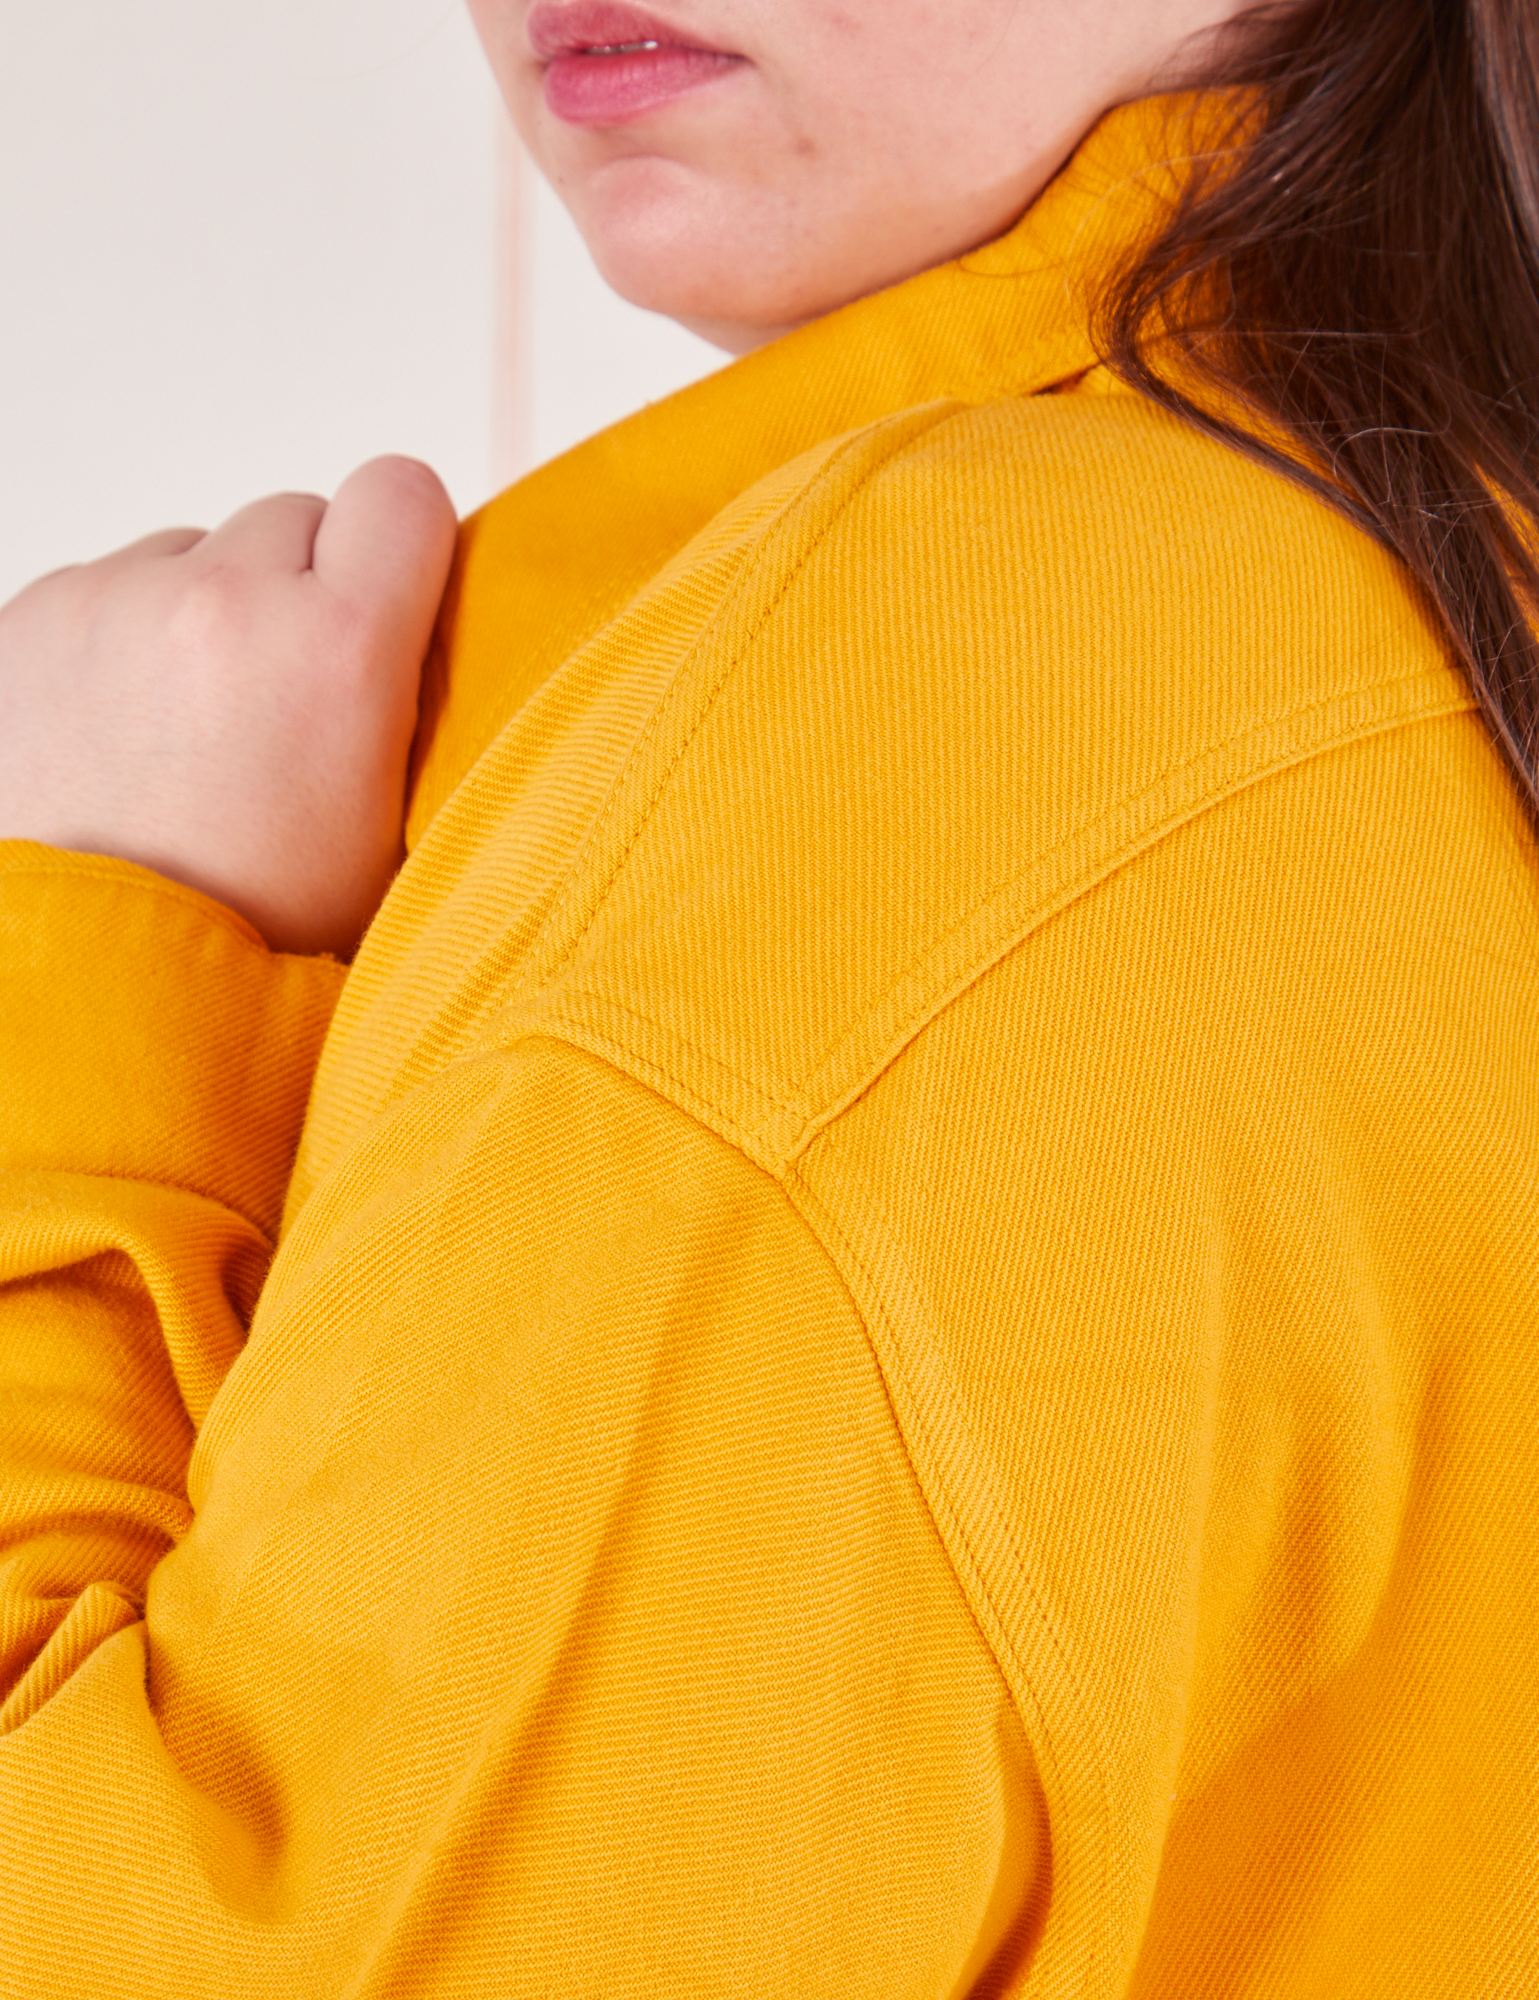 Shoulder close up of Flannel Overshirt in Mustard Yellow on Marielena